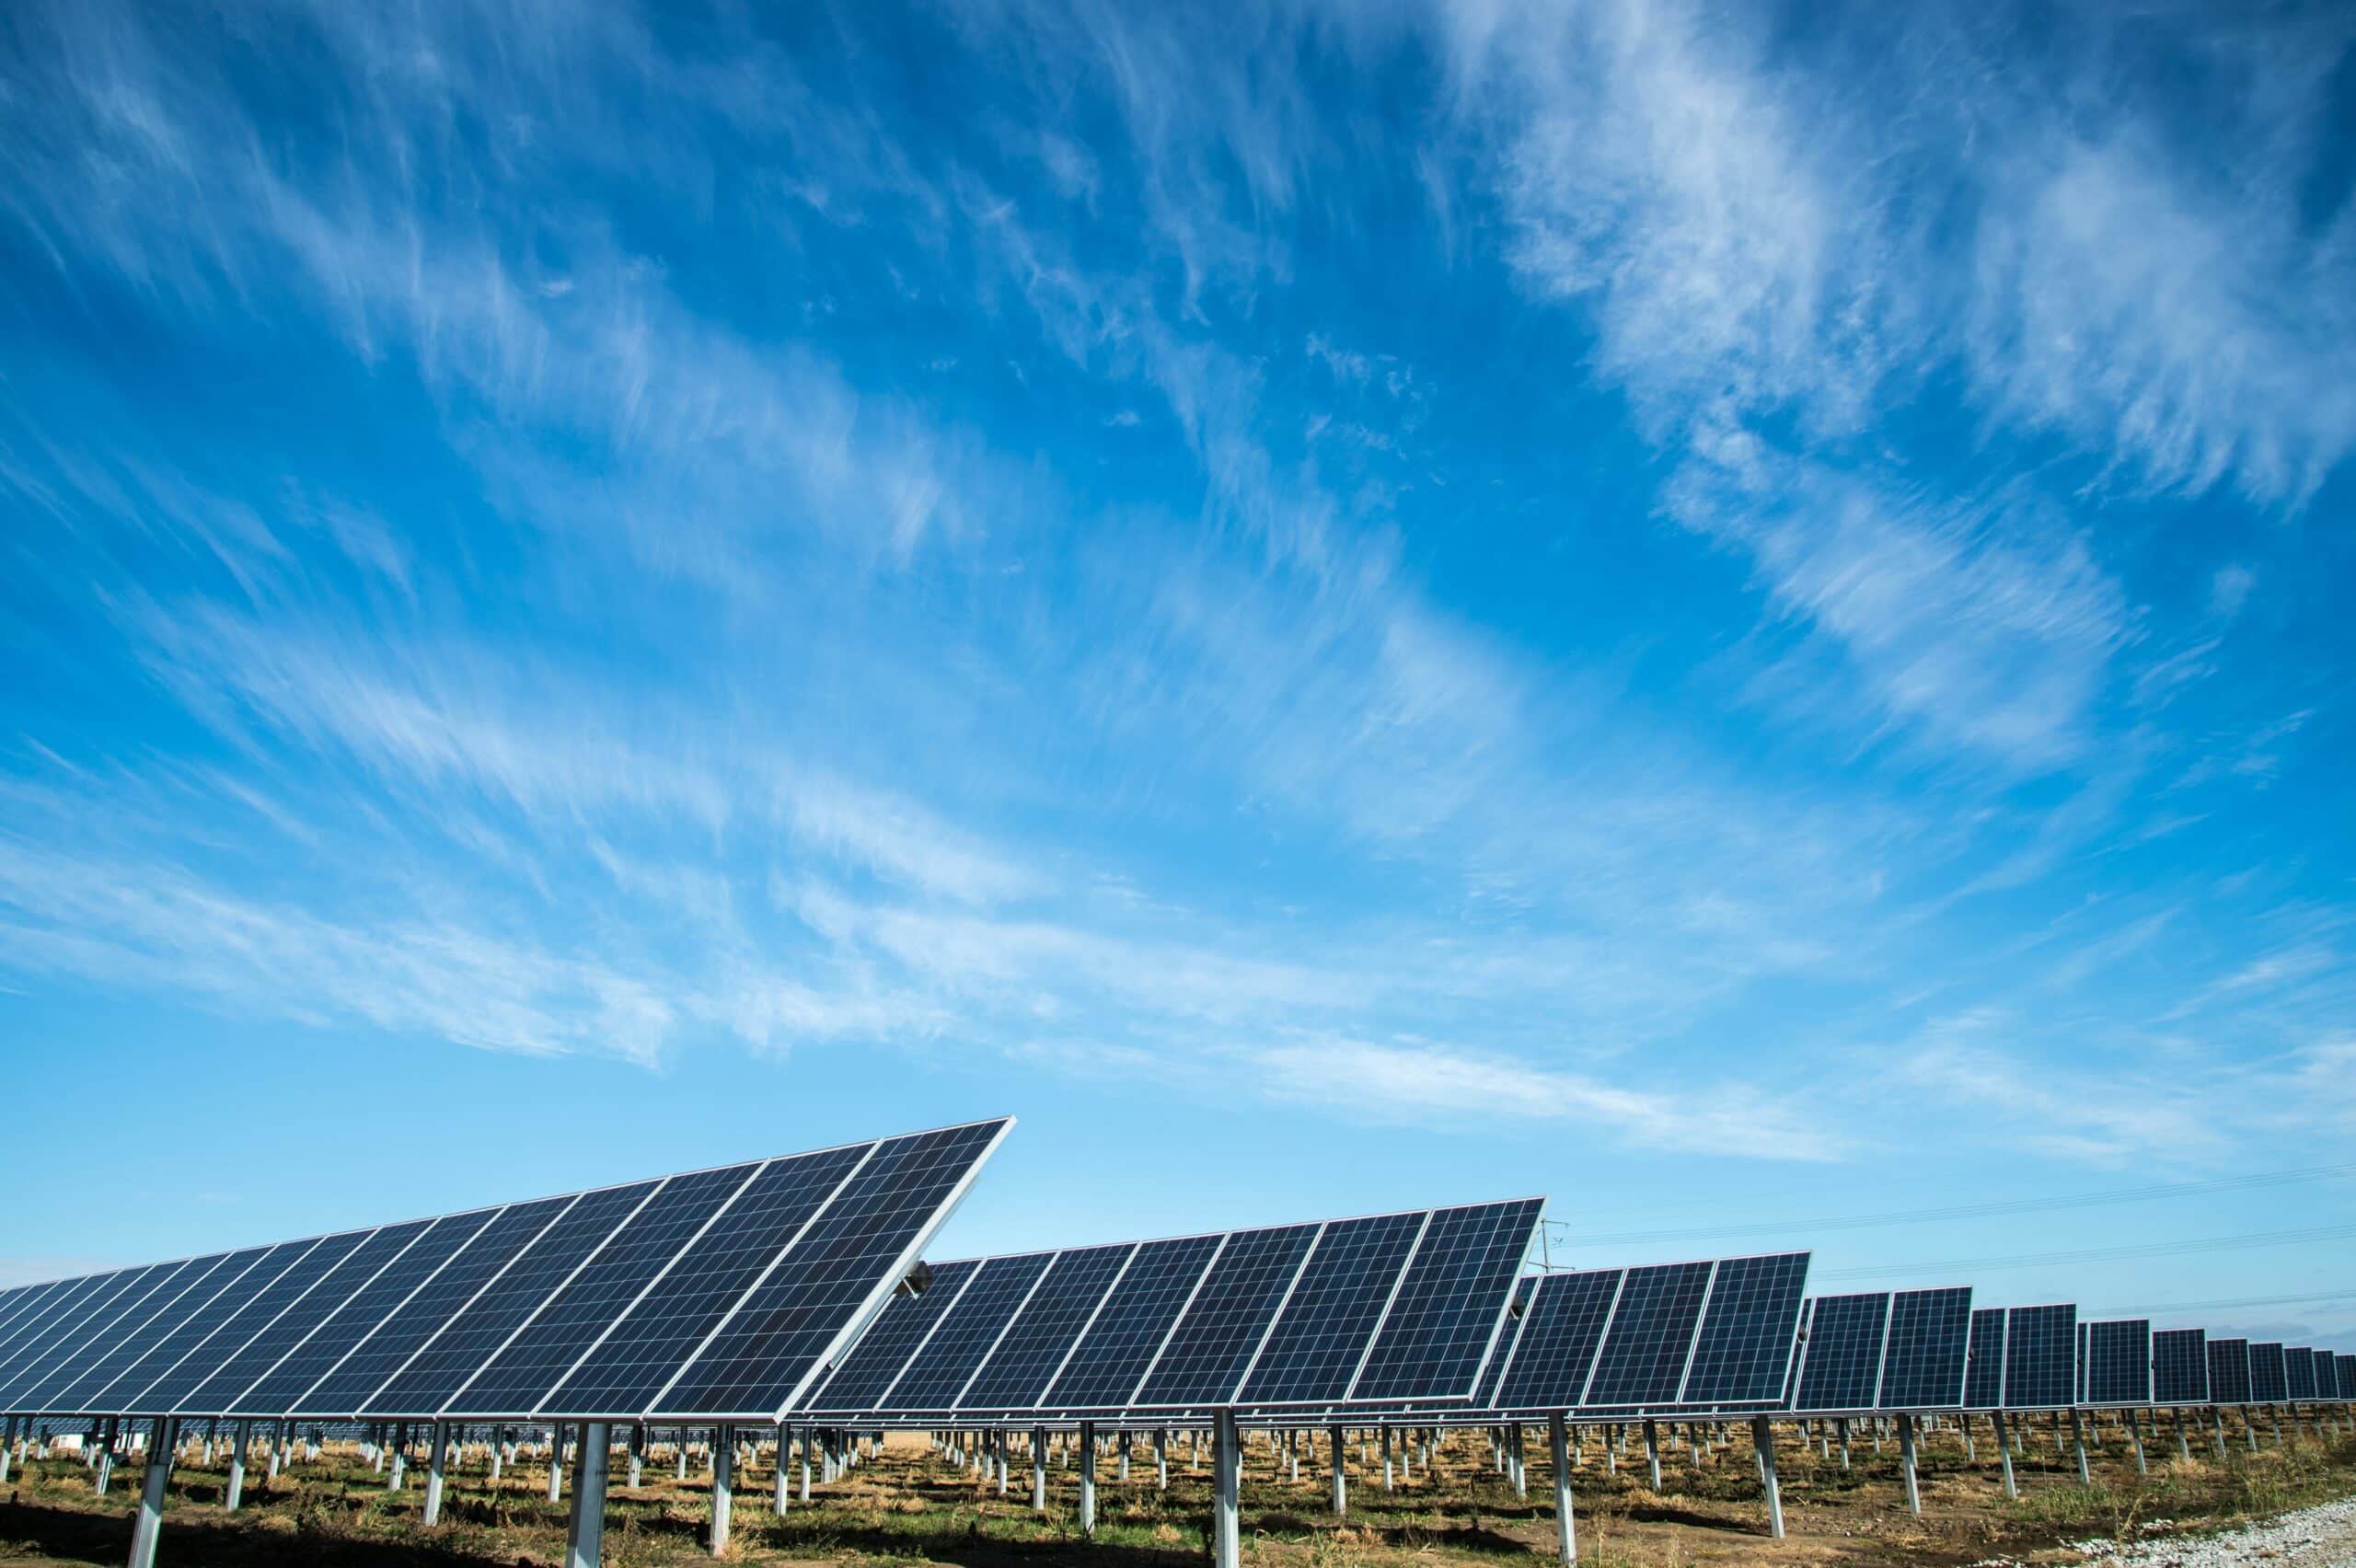 Ground mounted solar panels are arranged in neat rows under a blue sky.